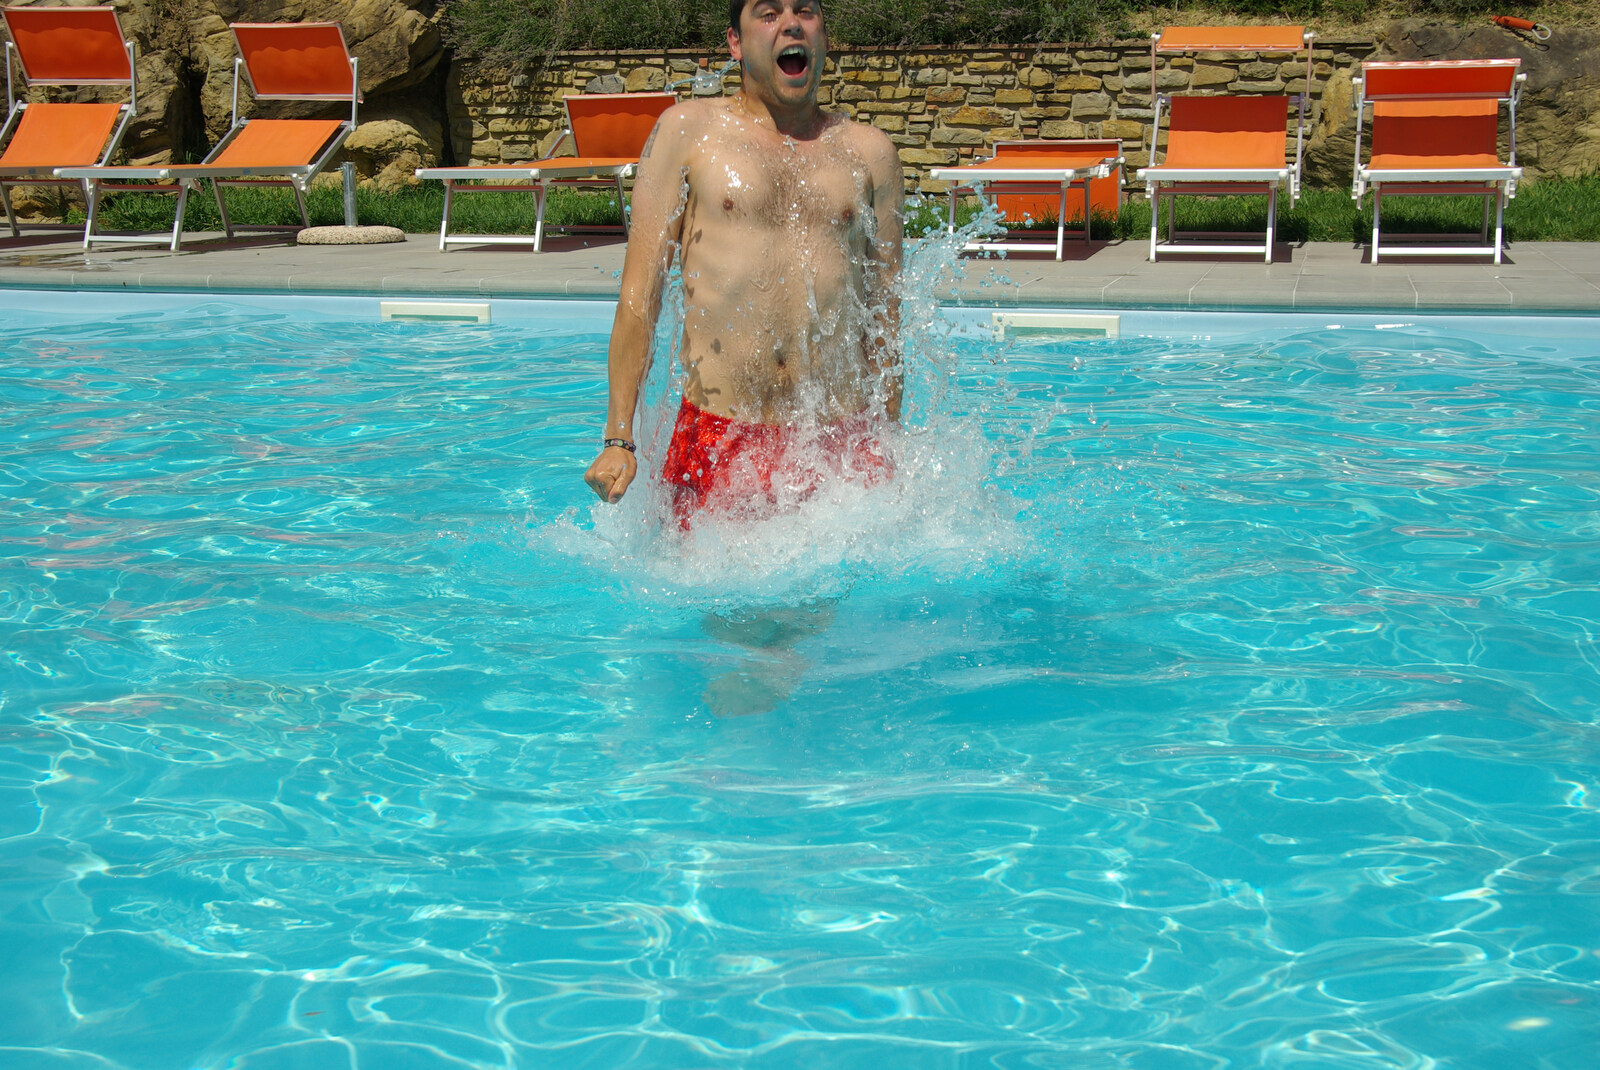 Pieter leaps out of the water from Tenuta Il Palazzo in Arezzo, Tuscany, Italy - 22nd July 2008